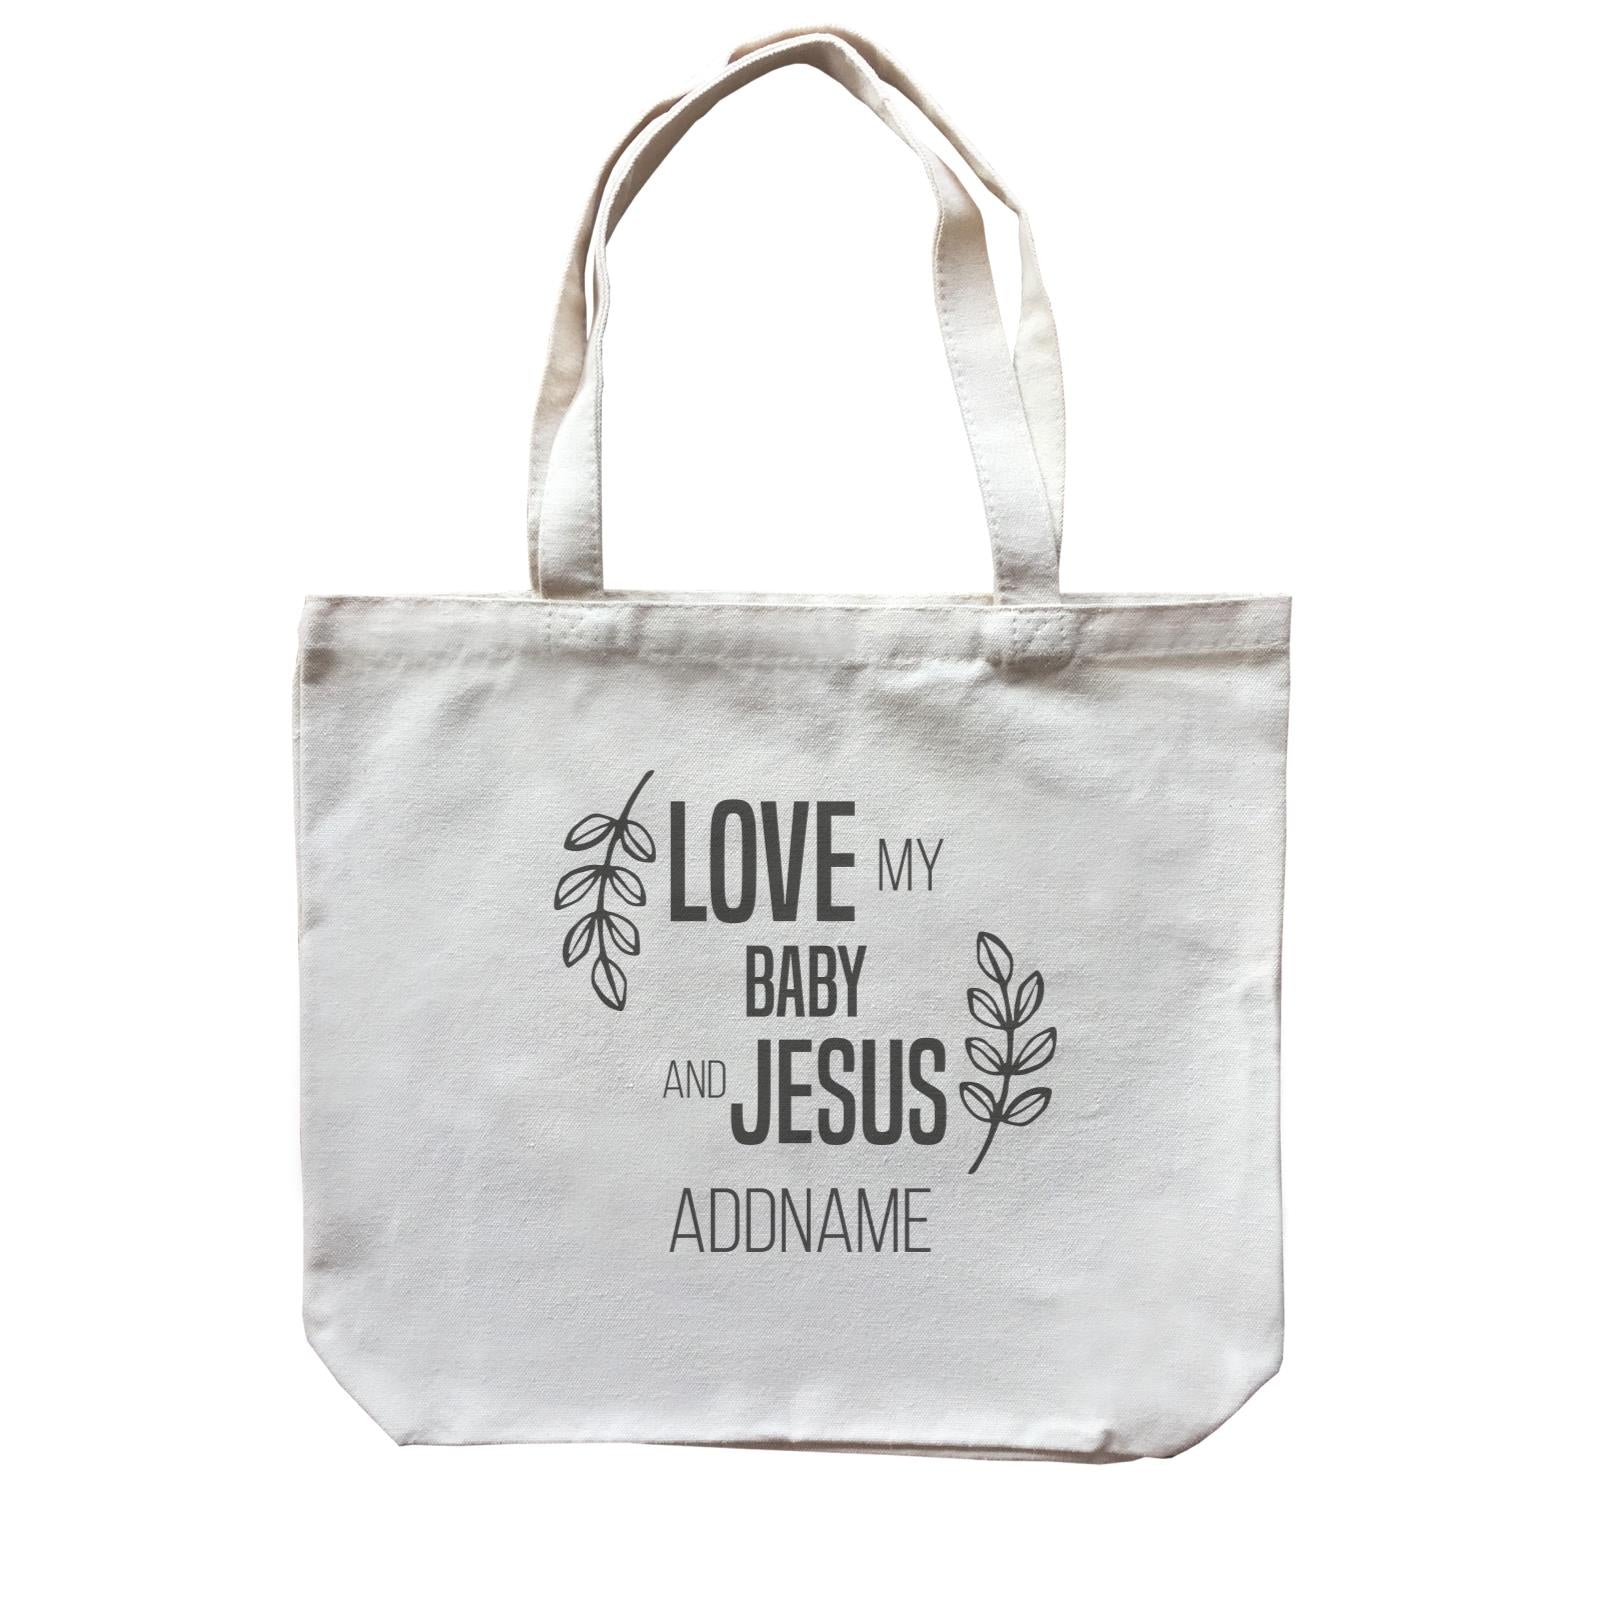 Christian Series Love My Baby And Jesus Addname Canvas Bag